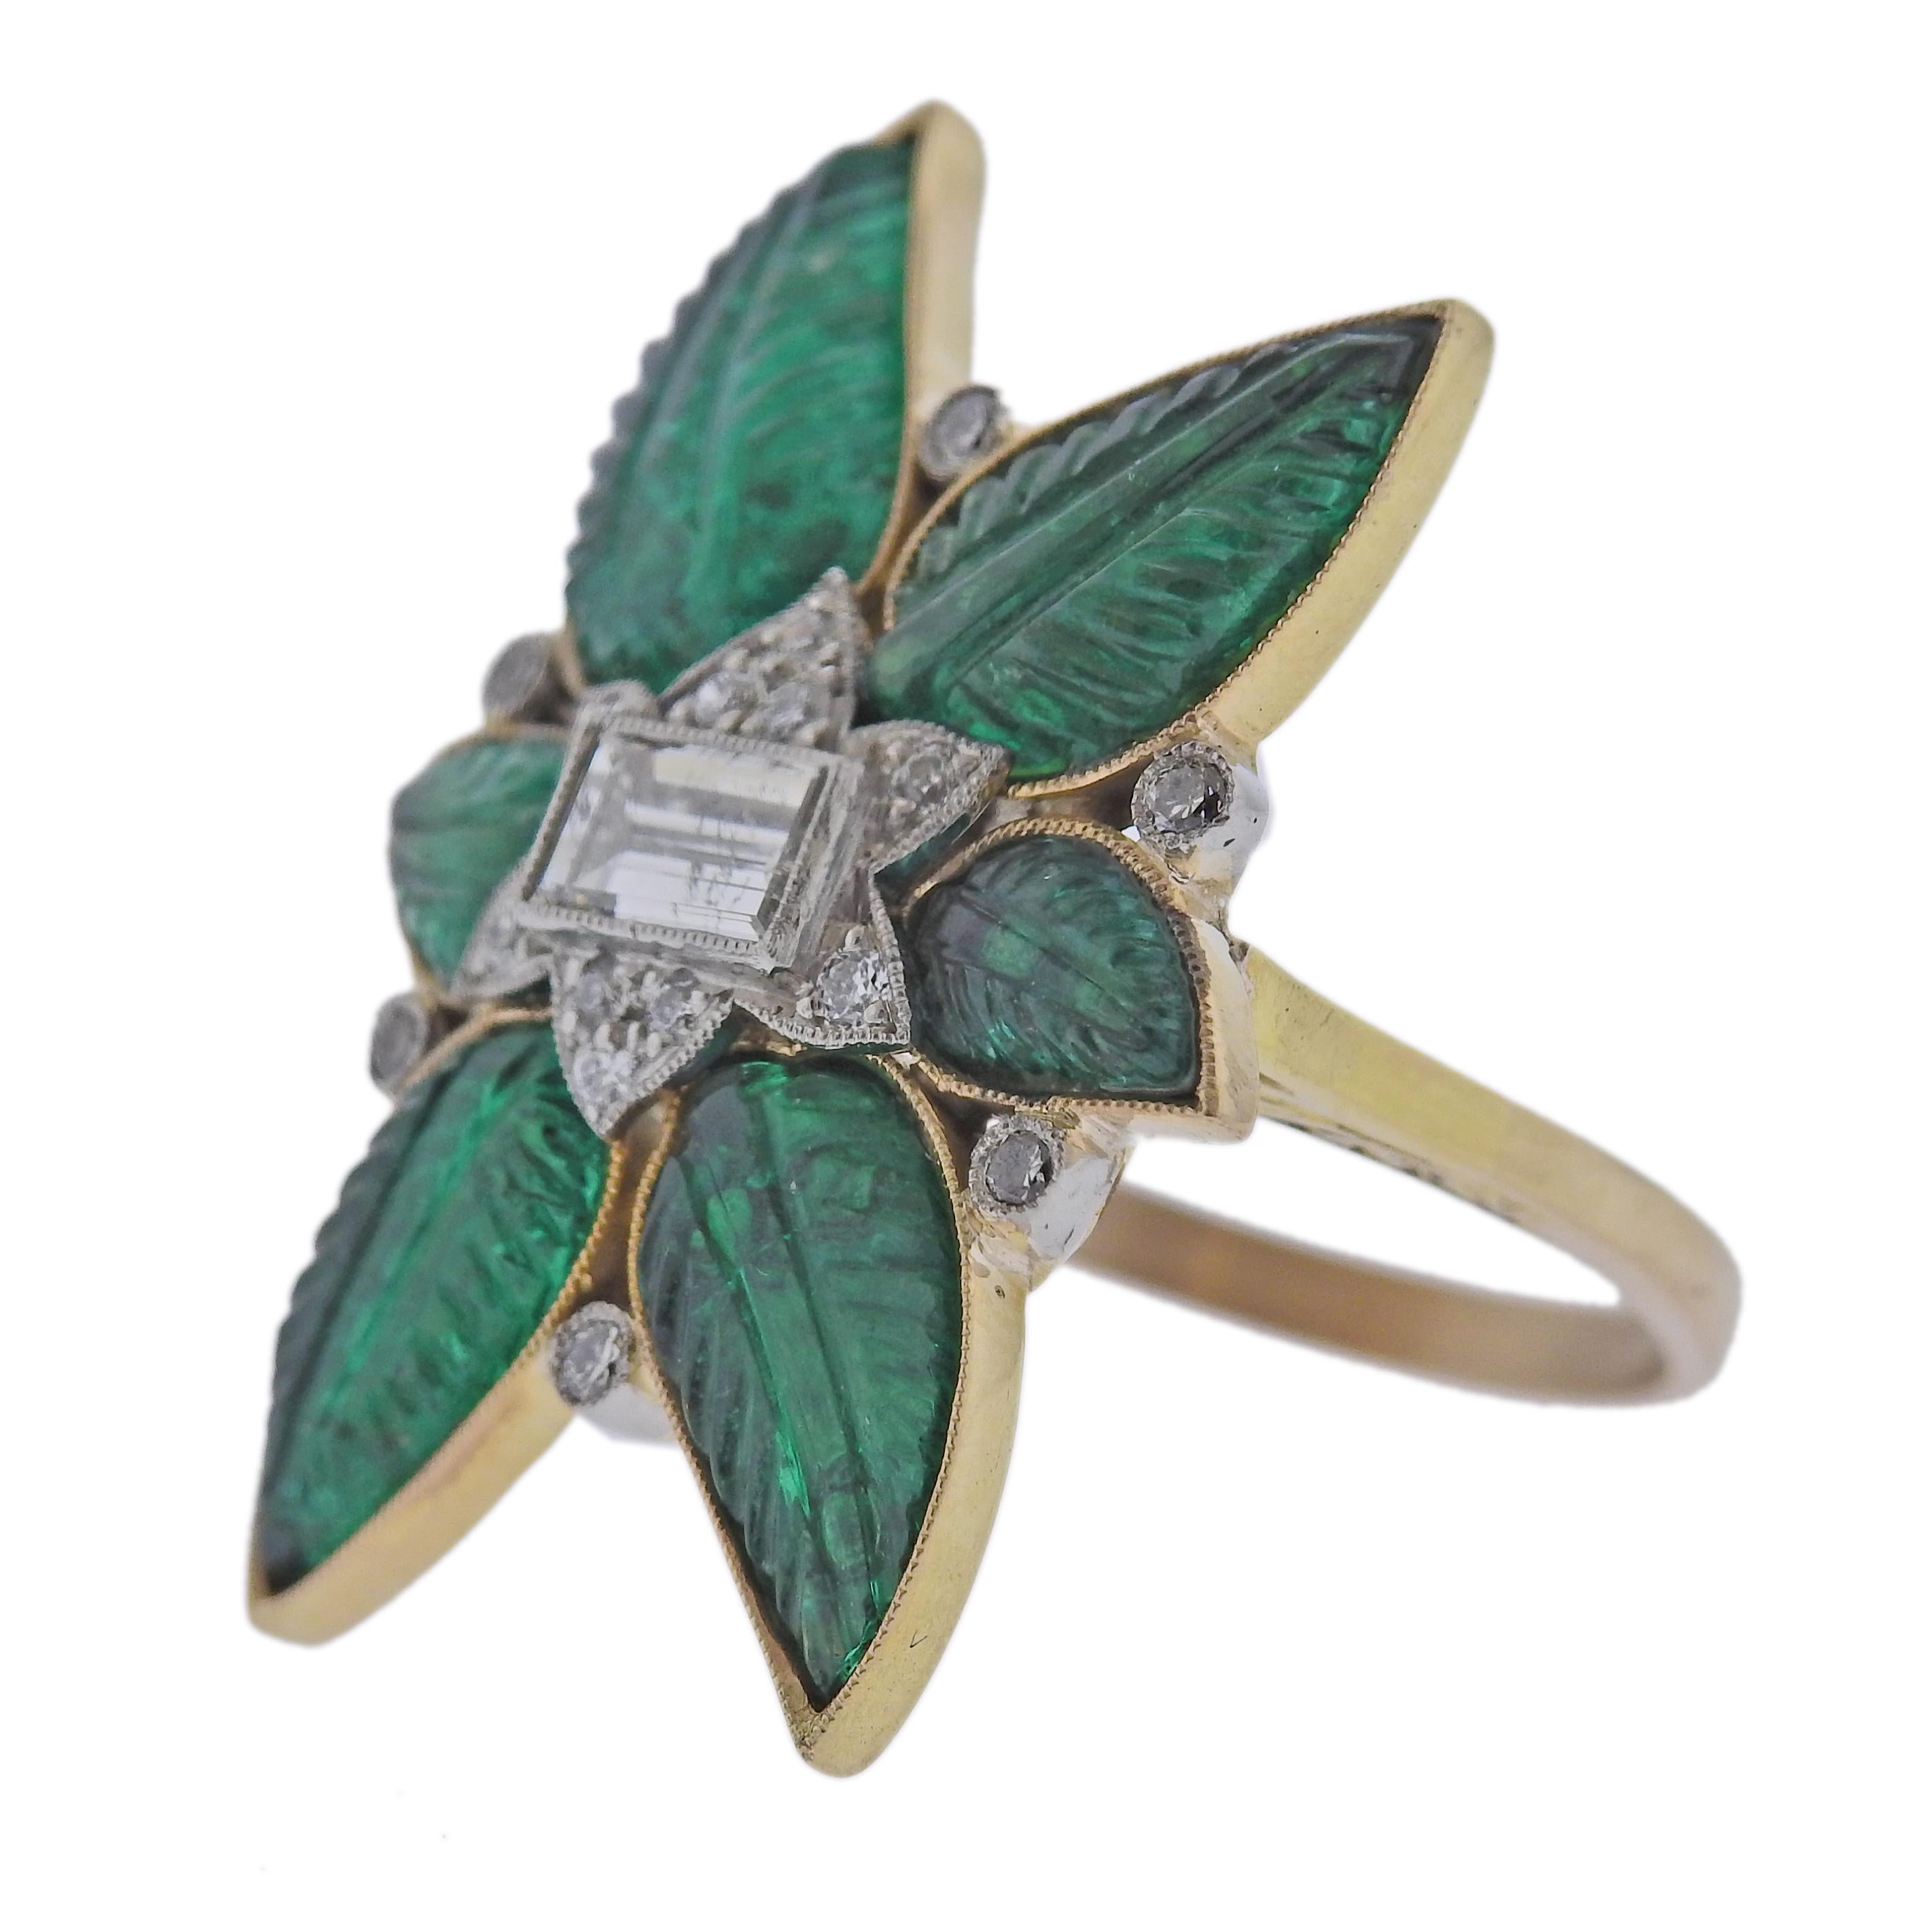 18k gold ring with carved emerald and approx. 0.55-0.60ctw diamonds. Ring size  7.75 (EU 56) and is 32 x 24mm top. Weight 12.8 grams.